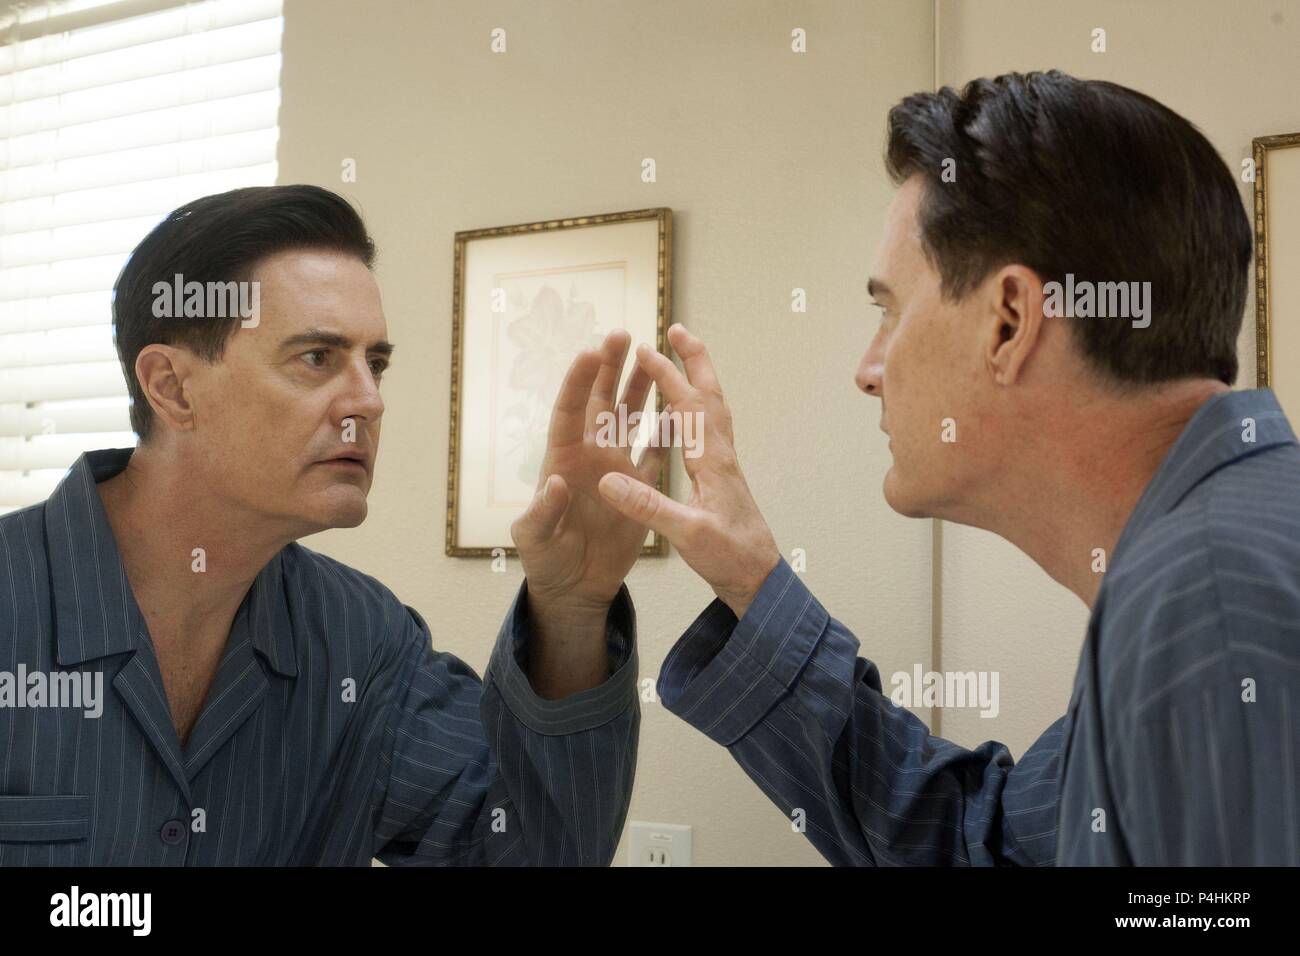 Original Film Title: TWIN PEAKS.  English Title: TWIN PEAKS.  Film Director: DAVID LYNCH; MARK FROST.  Year: 2017.  Stars: KYLE MACLACHLAN. Credit: SHOWTIME NETWORKS / Album Stock Photo